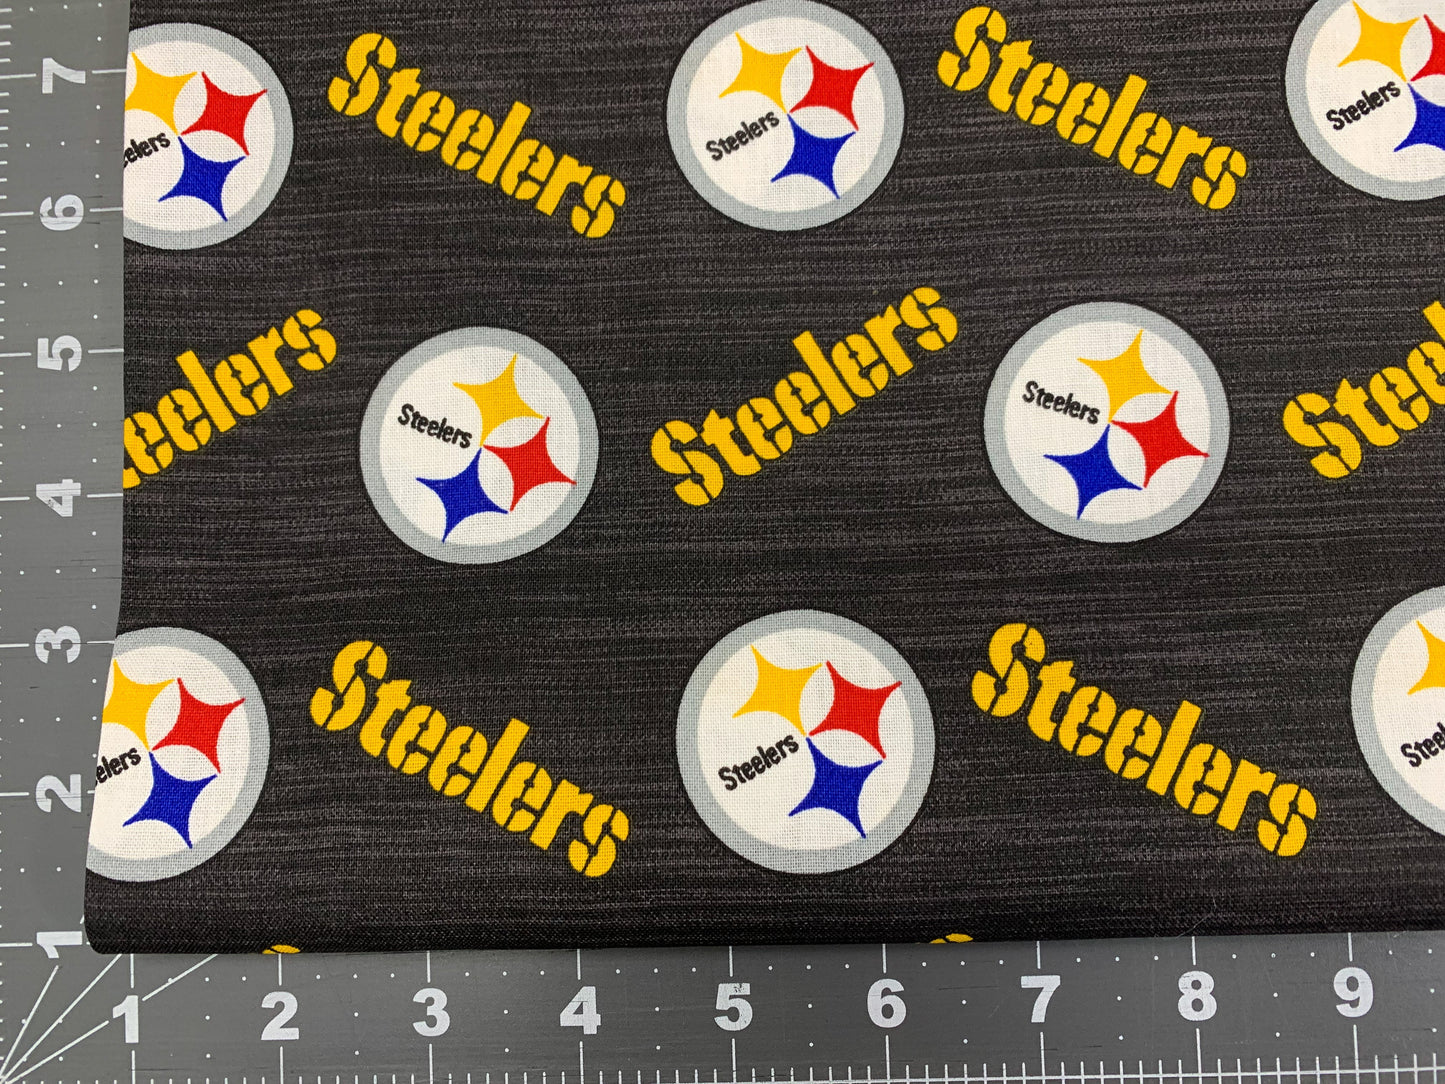 Pittsburgh Steelers fabric 70499-D Steeler NFL fabric